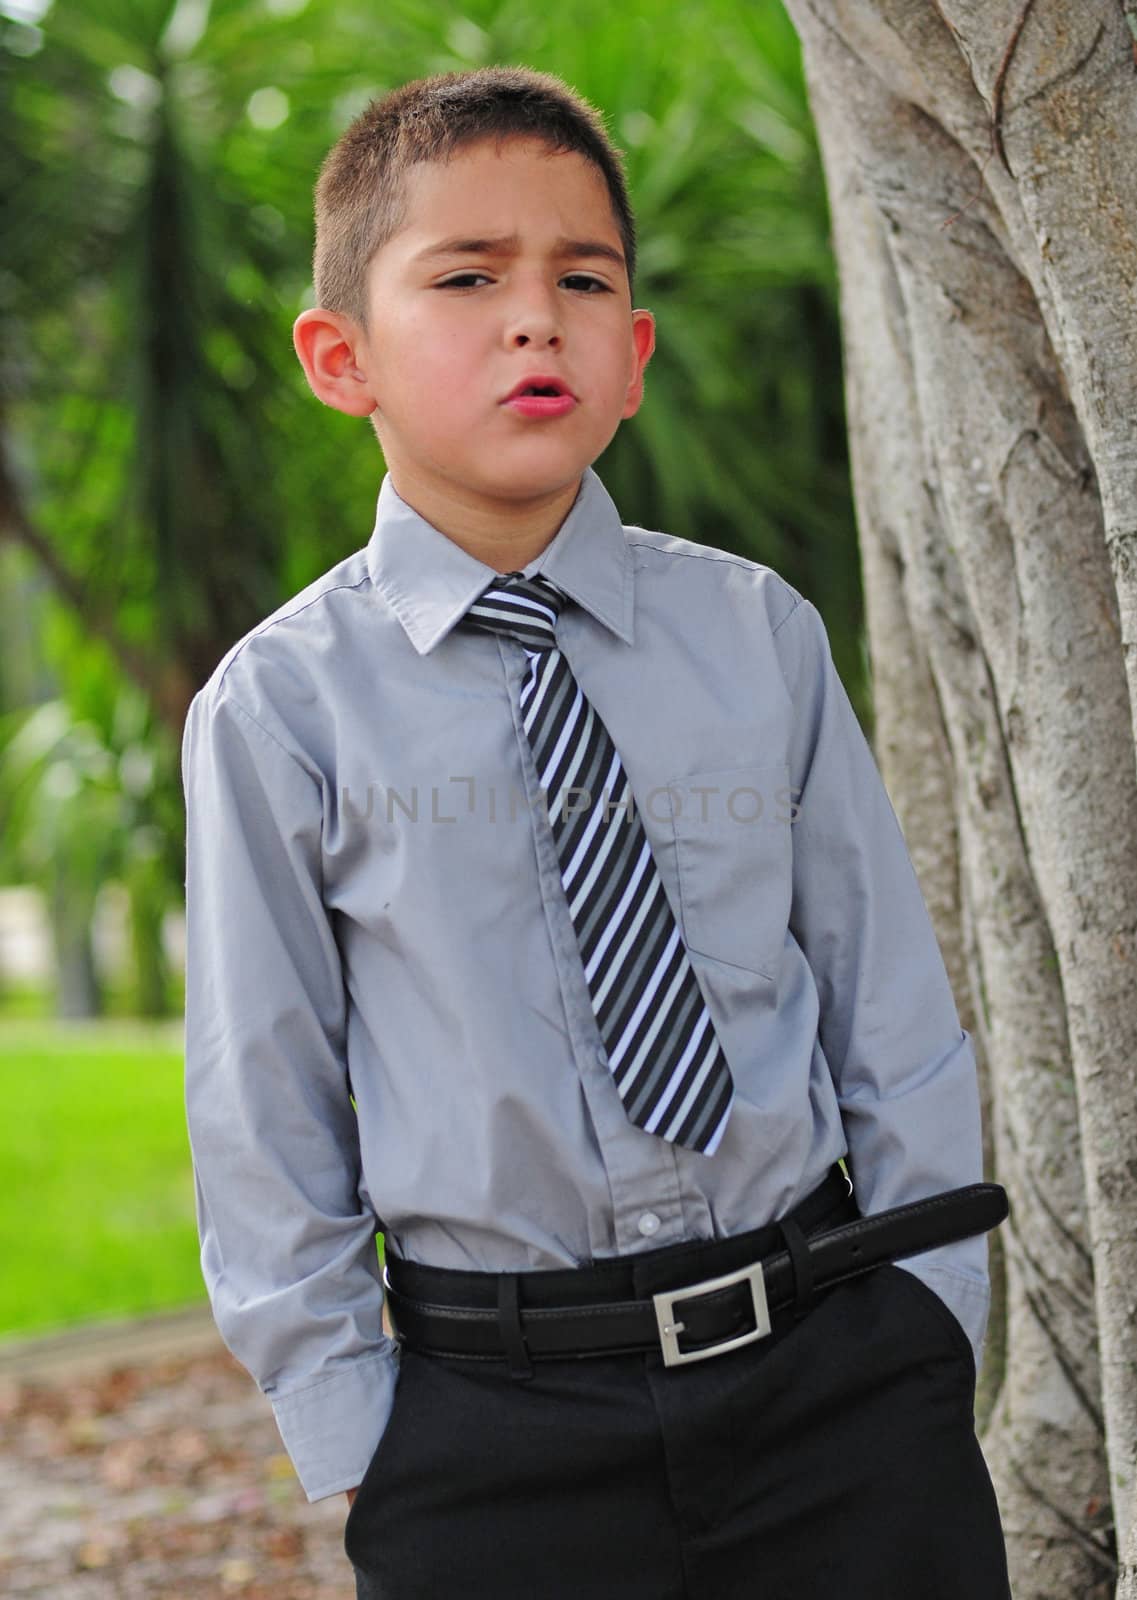 Serious attractive young boy in business attire with serious face and hands in pocket